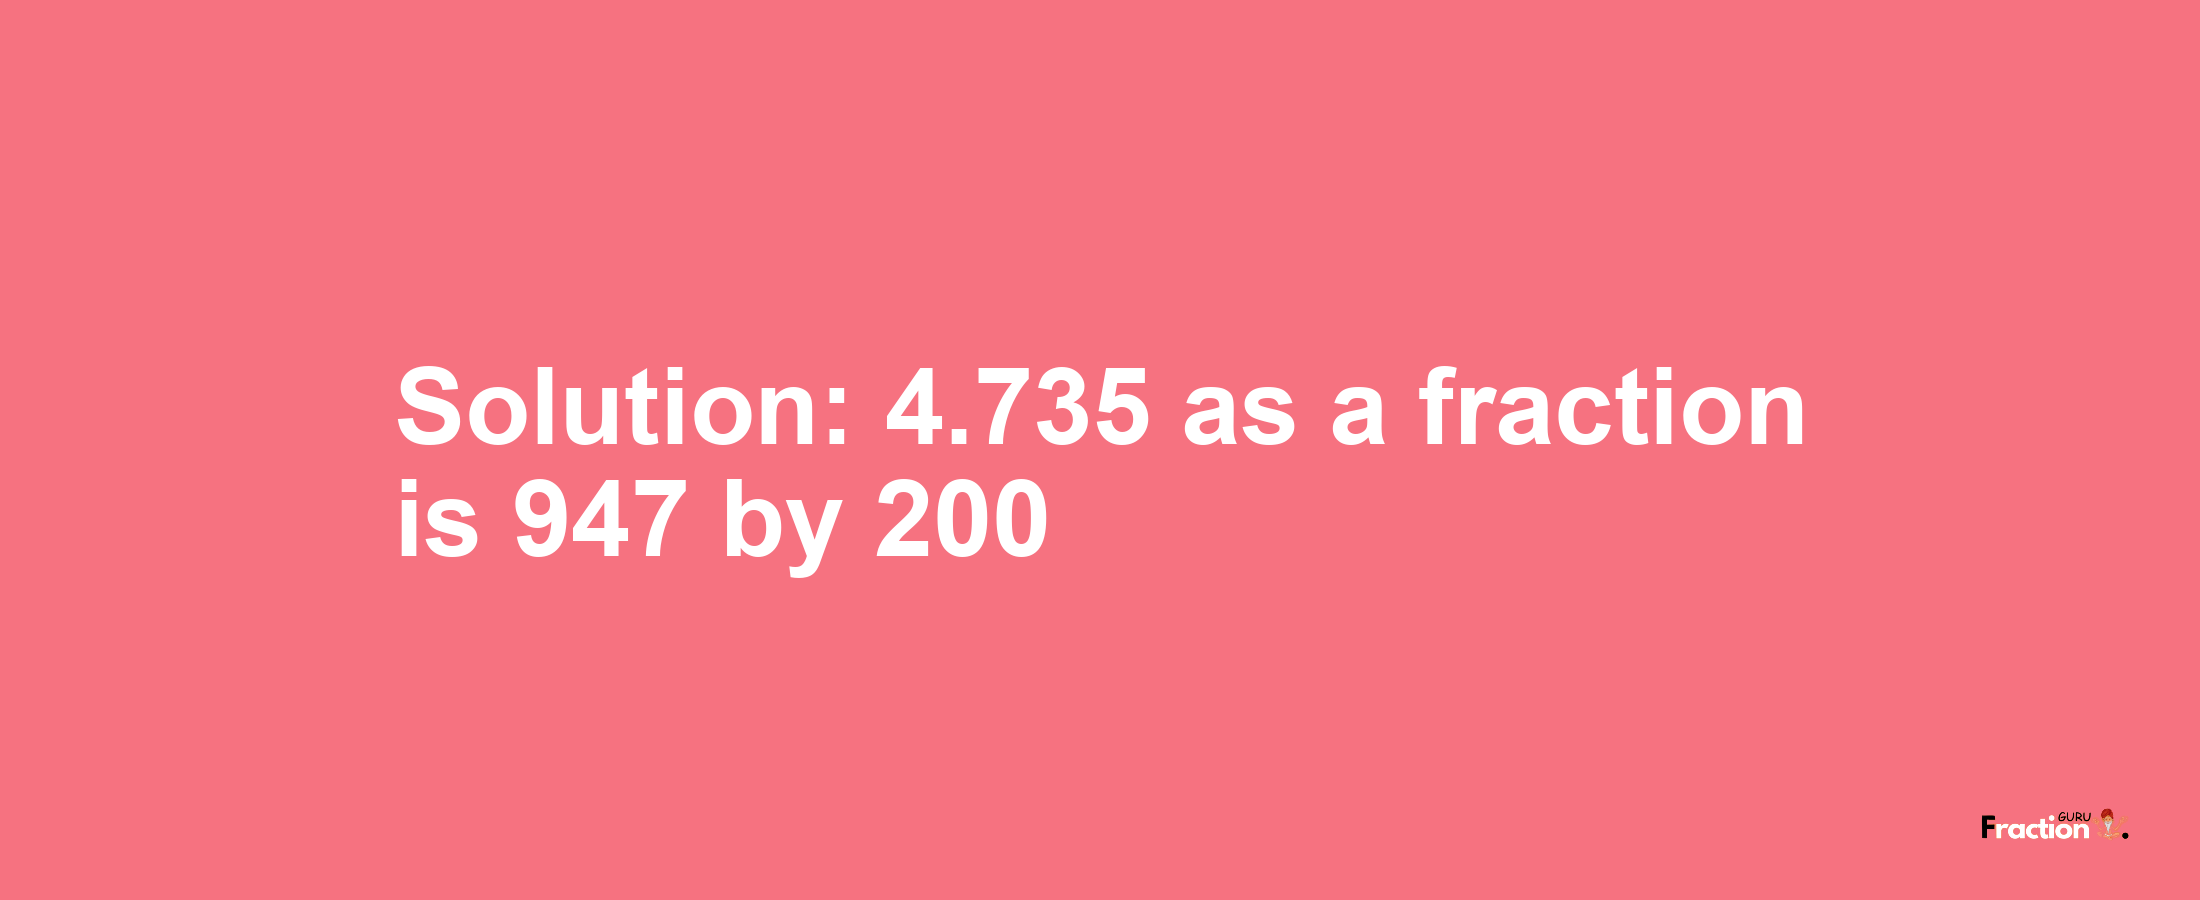 Solution:4.735 as a fraction is 947/200